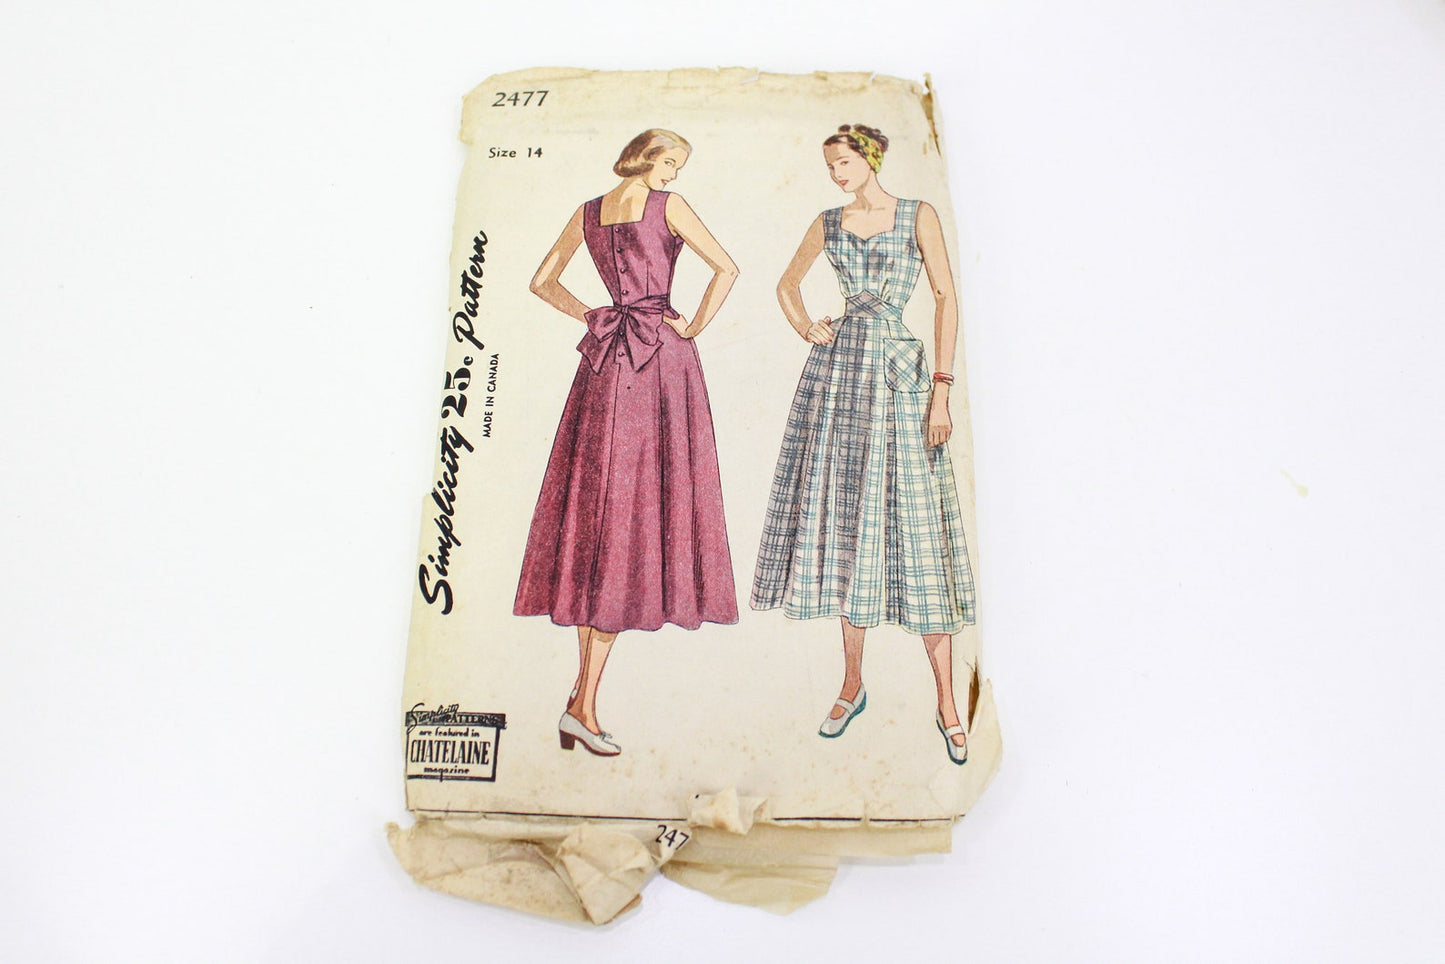 1940s Women's Dress Sewing Pattern Simplicity 2477, Vintage Summer Dress with Bow Sewing Pattern, Pre-Cut, Complete, Bust 32 in.